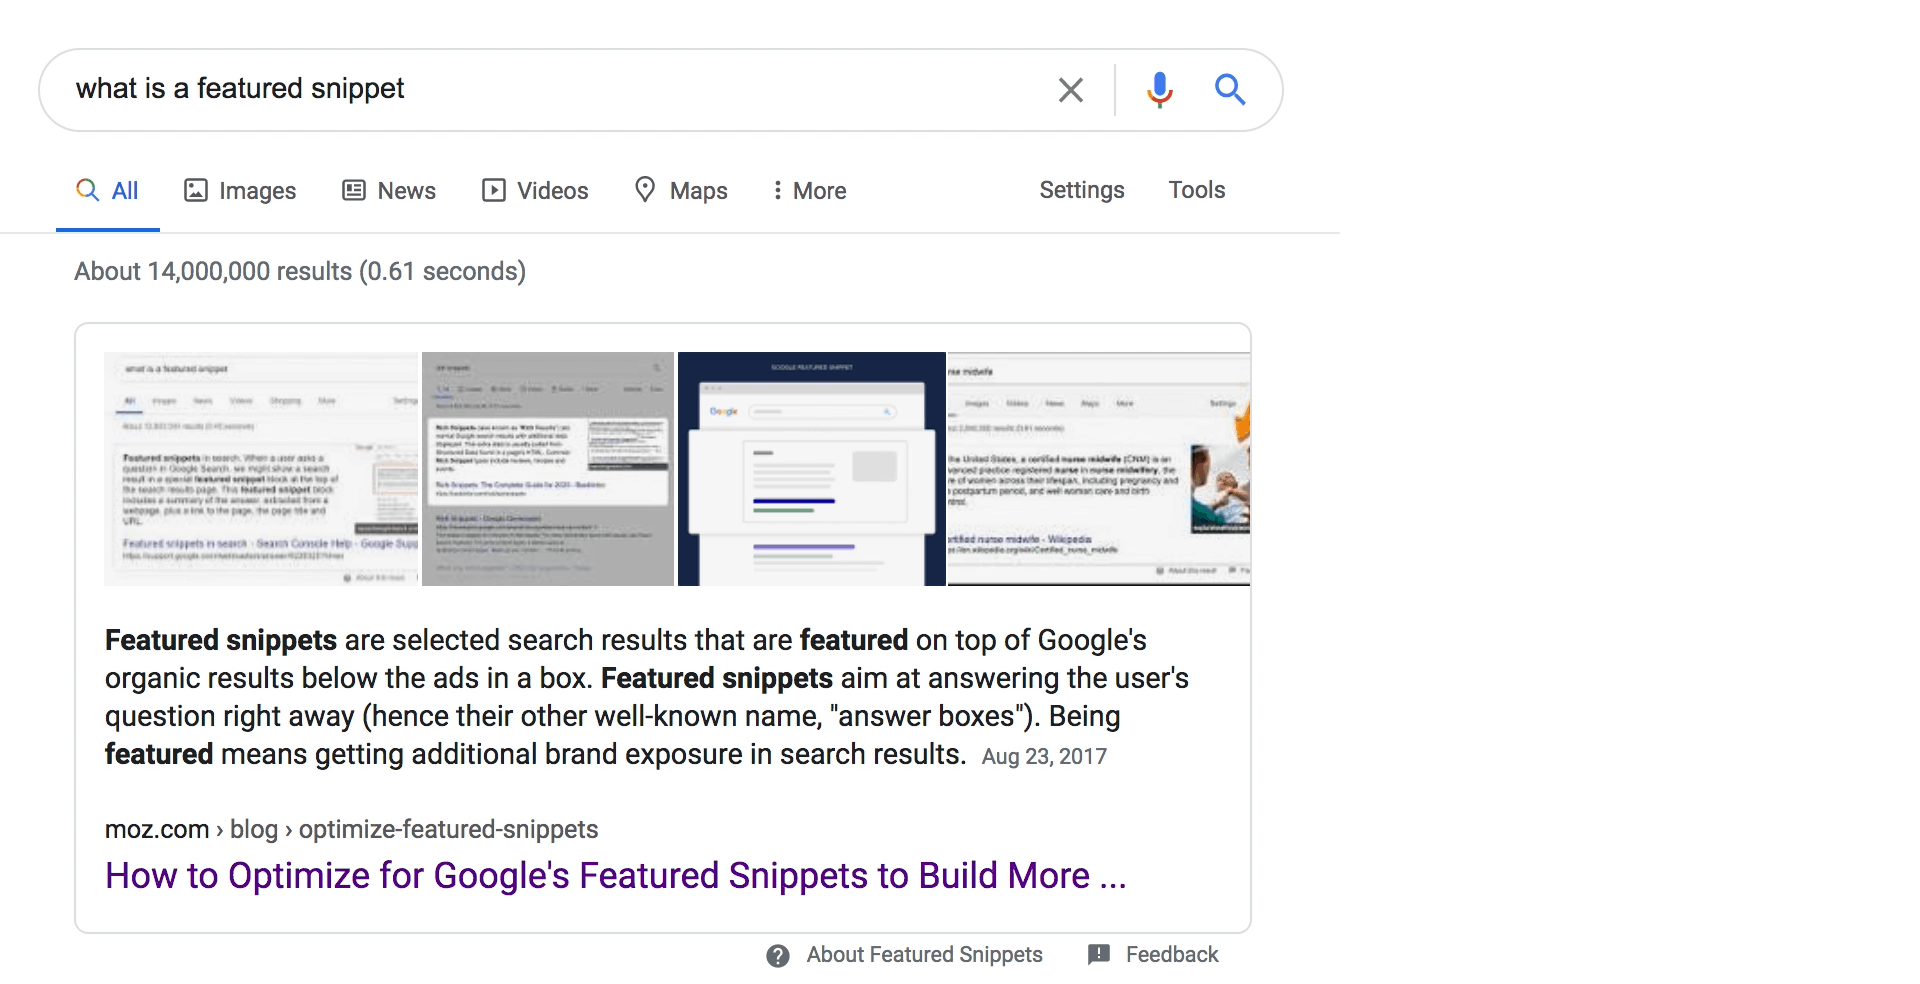 A featured snippet about "Featured Snippets" courtesy of MOZ